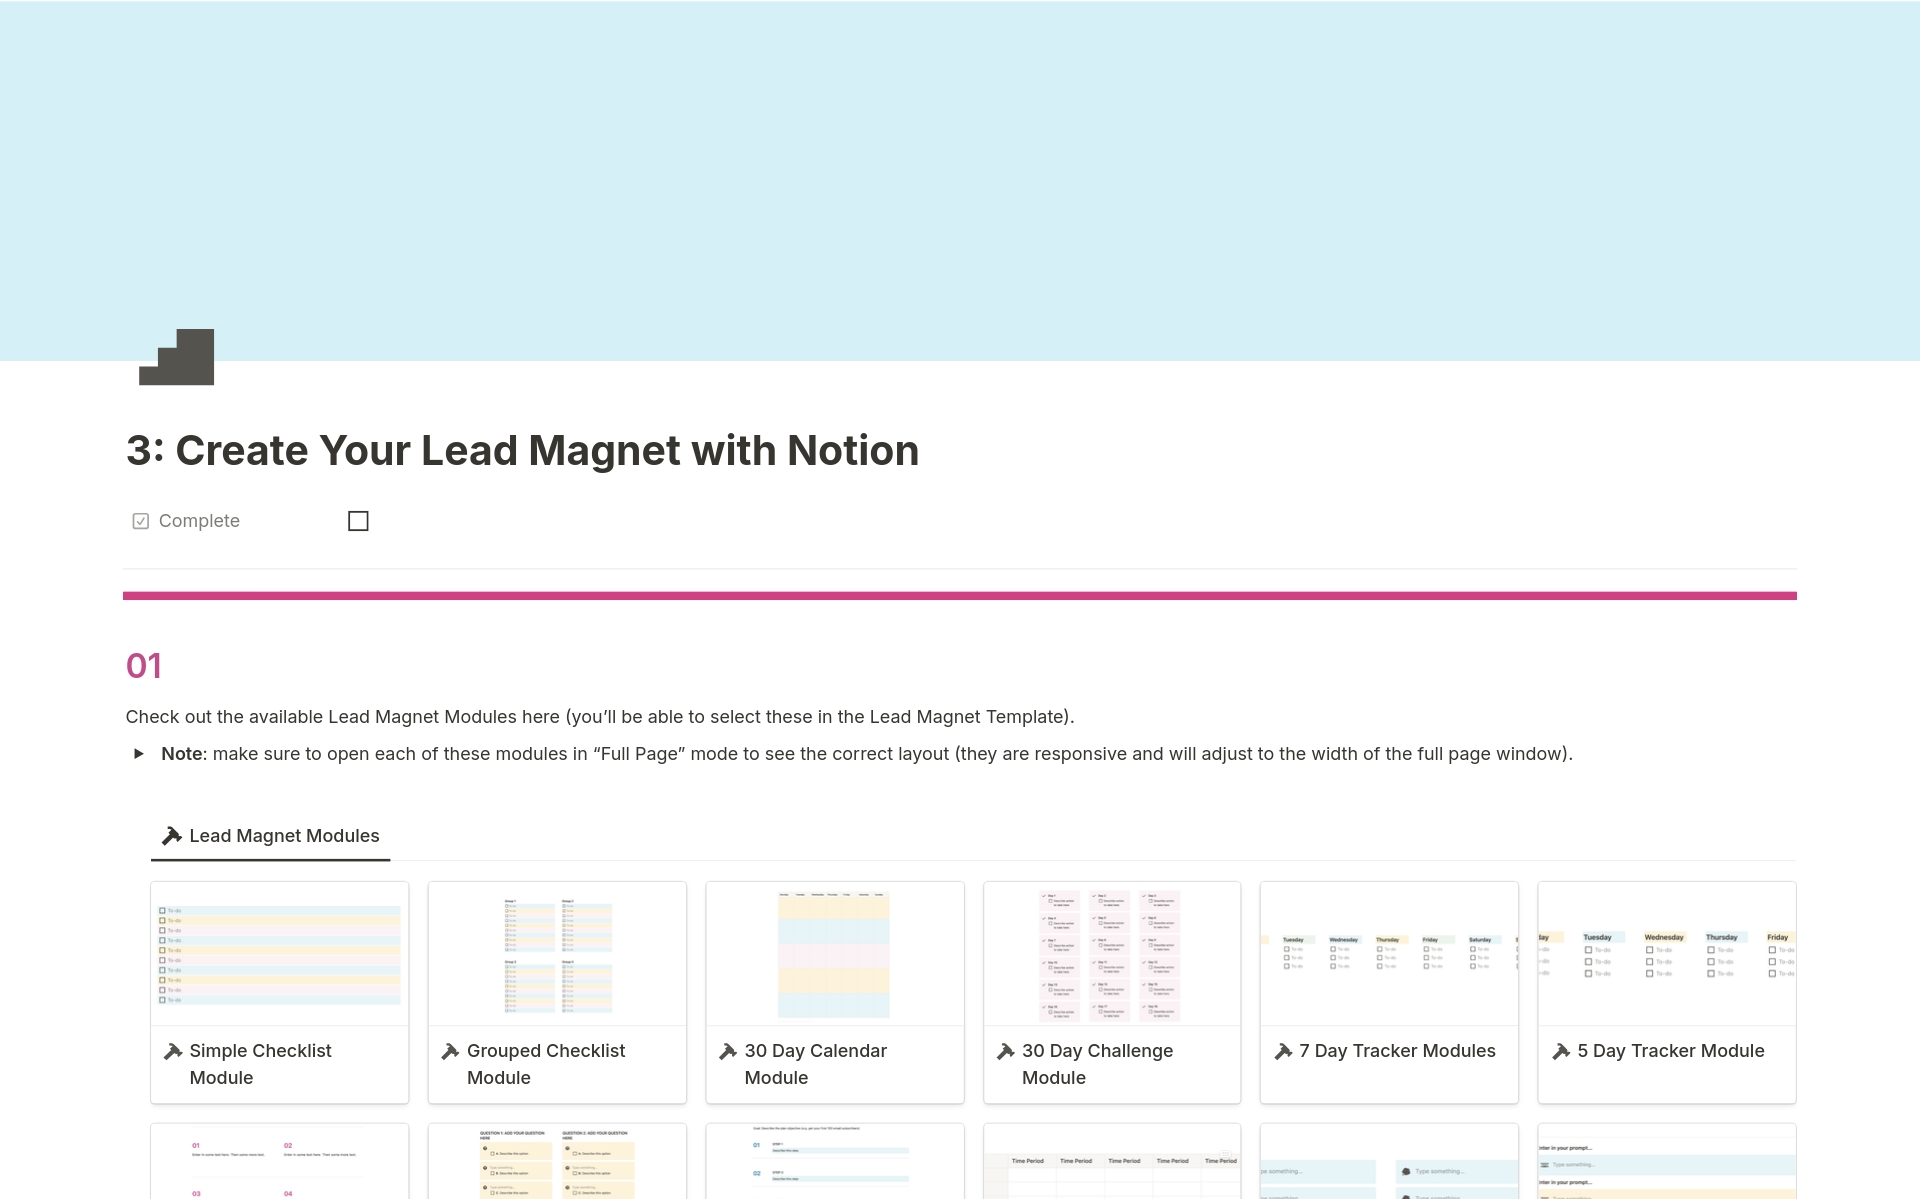 What if you could create a brand new lead magnet that grows your email list and your customer base using Notion?  The Simple Lead Magnet System takes you through a step-by-step process to create a simple lead magnet that stands out and helps to grow your list and customer base.